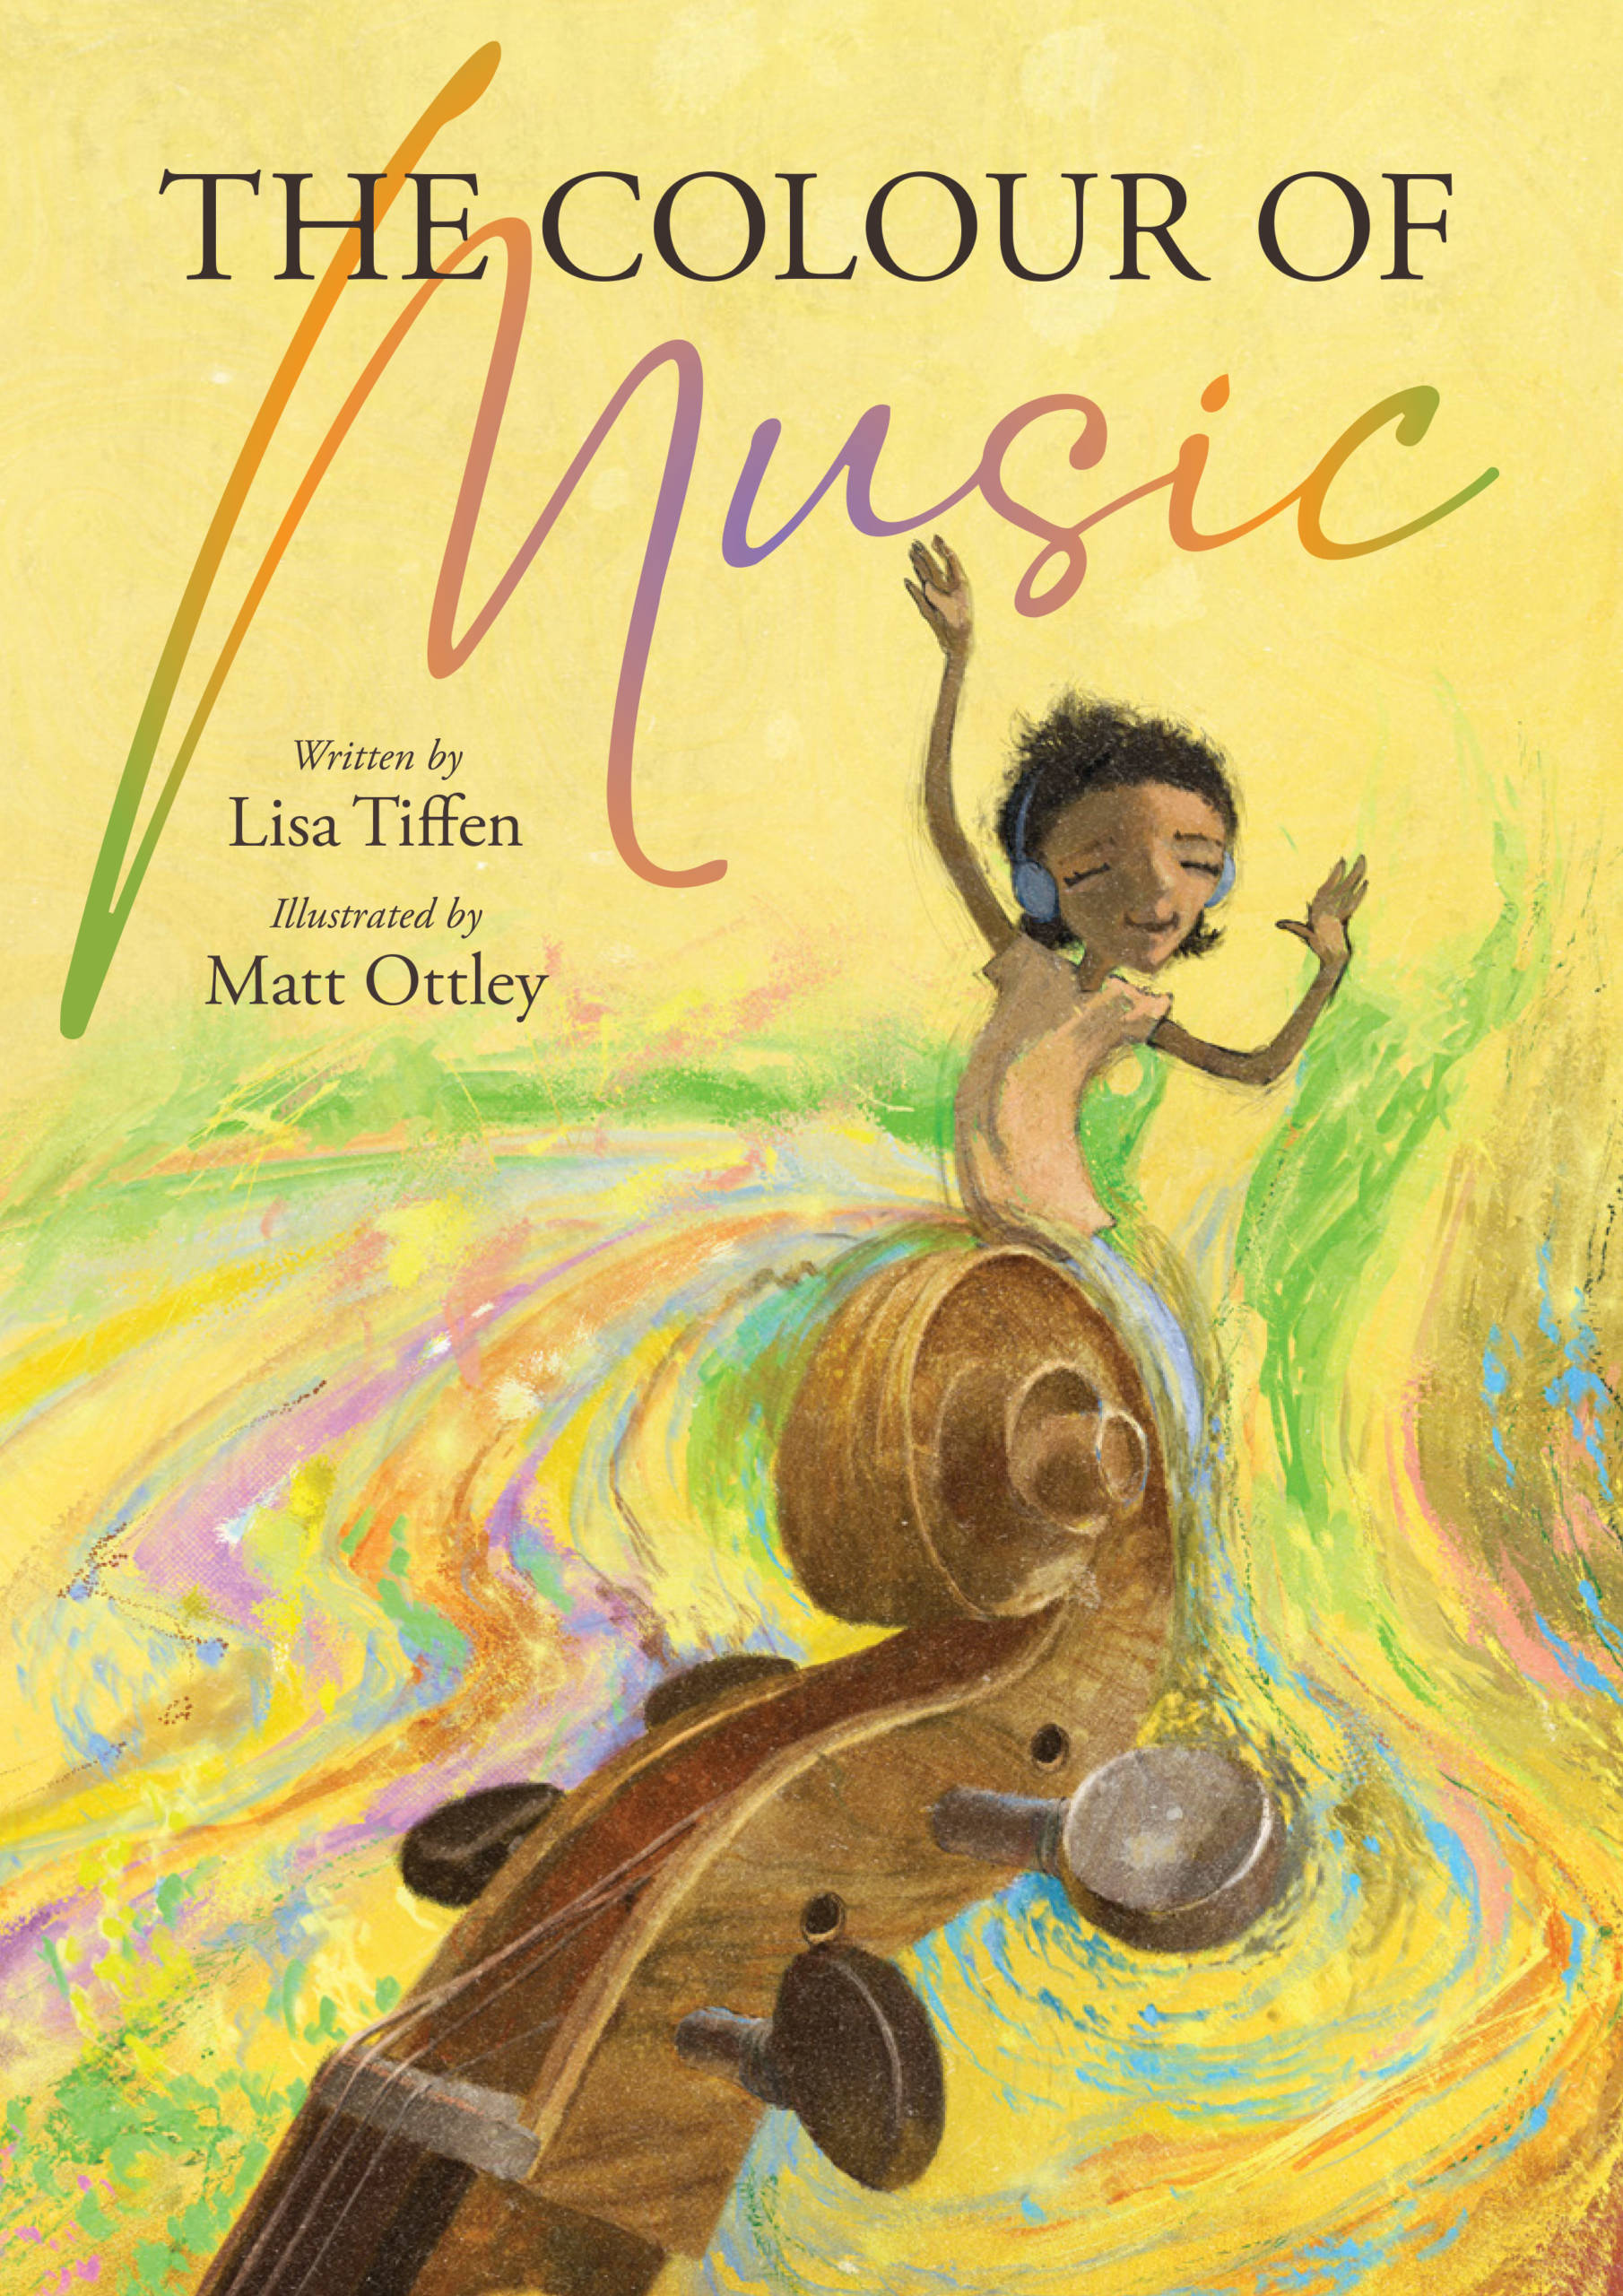 The Colour of Music book cover by Matt Ottley